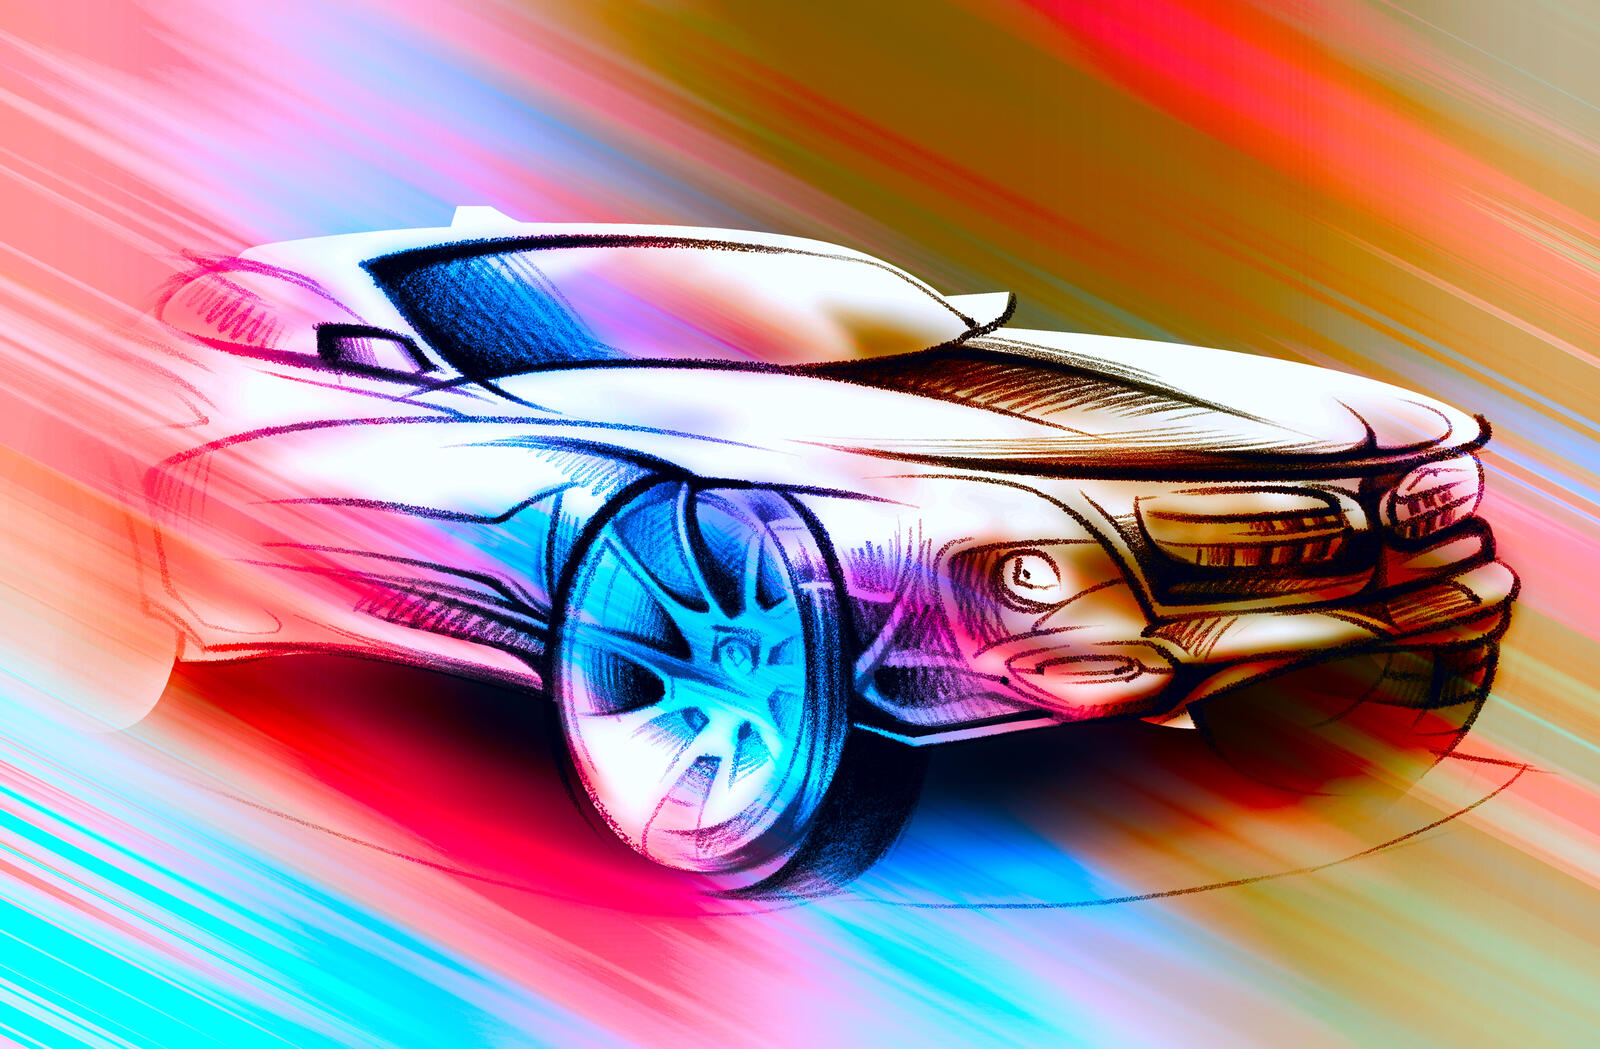 Wallpapers car wheels abstraction on the desktop